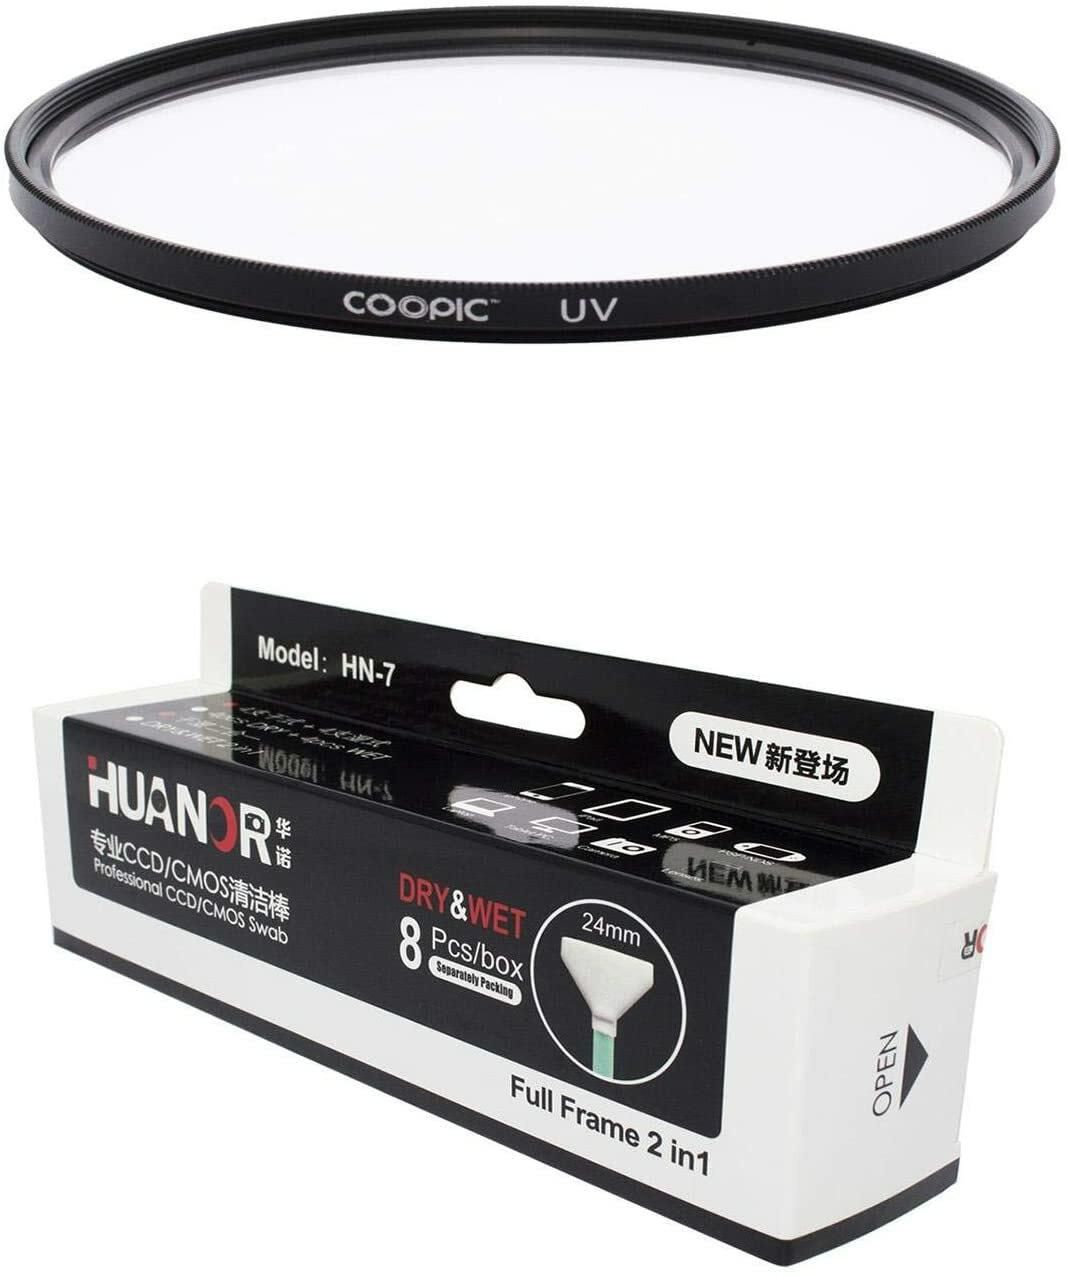 Coopic 55mm Uv Lens Protective Filter With 8Pcs Huanor Hn7 24mm Dry &amp; Wet Professional Ccd/cmos Swab Camera Sensor Cleaner For All Cameras